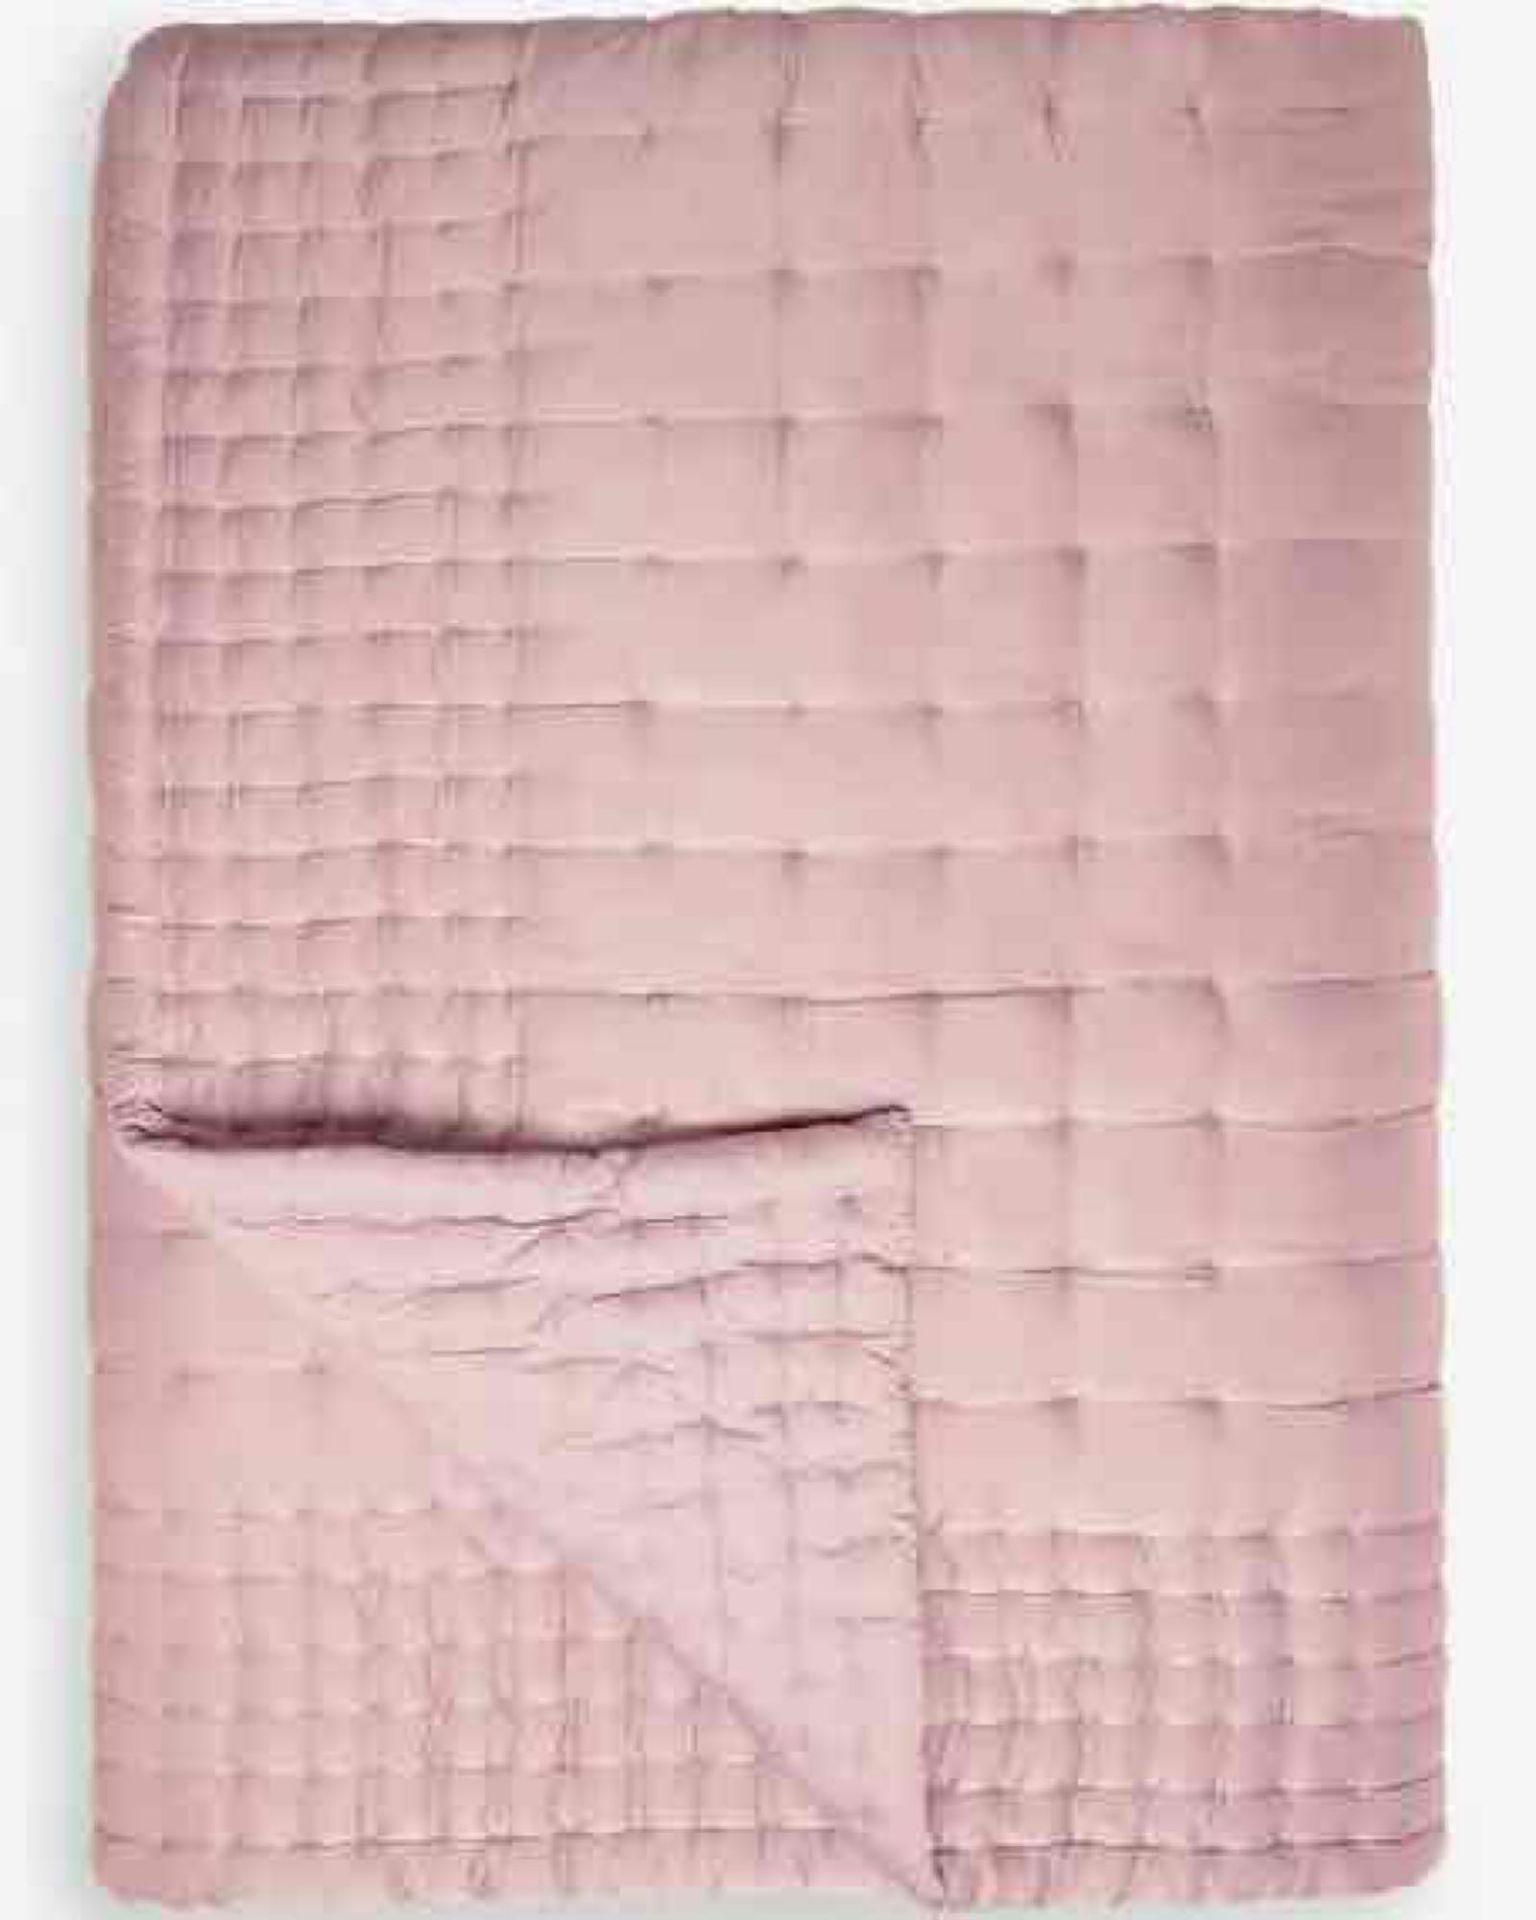 (Jb) RRP £295 Lot To Contain 1 Bagged John Lewis And Partners Hotel Silk Quilt In Pink (245X260Cm)(